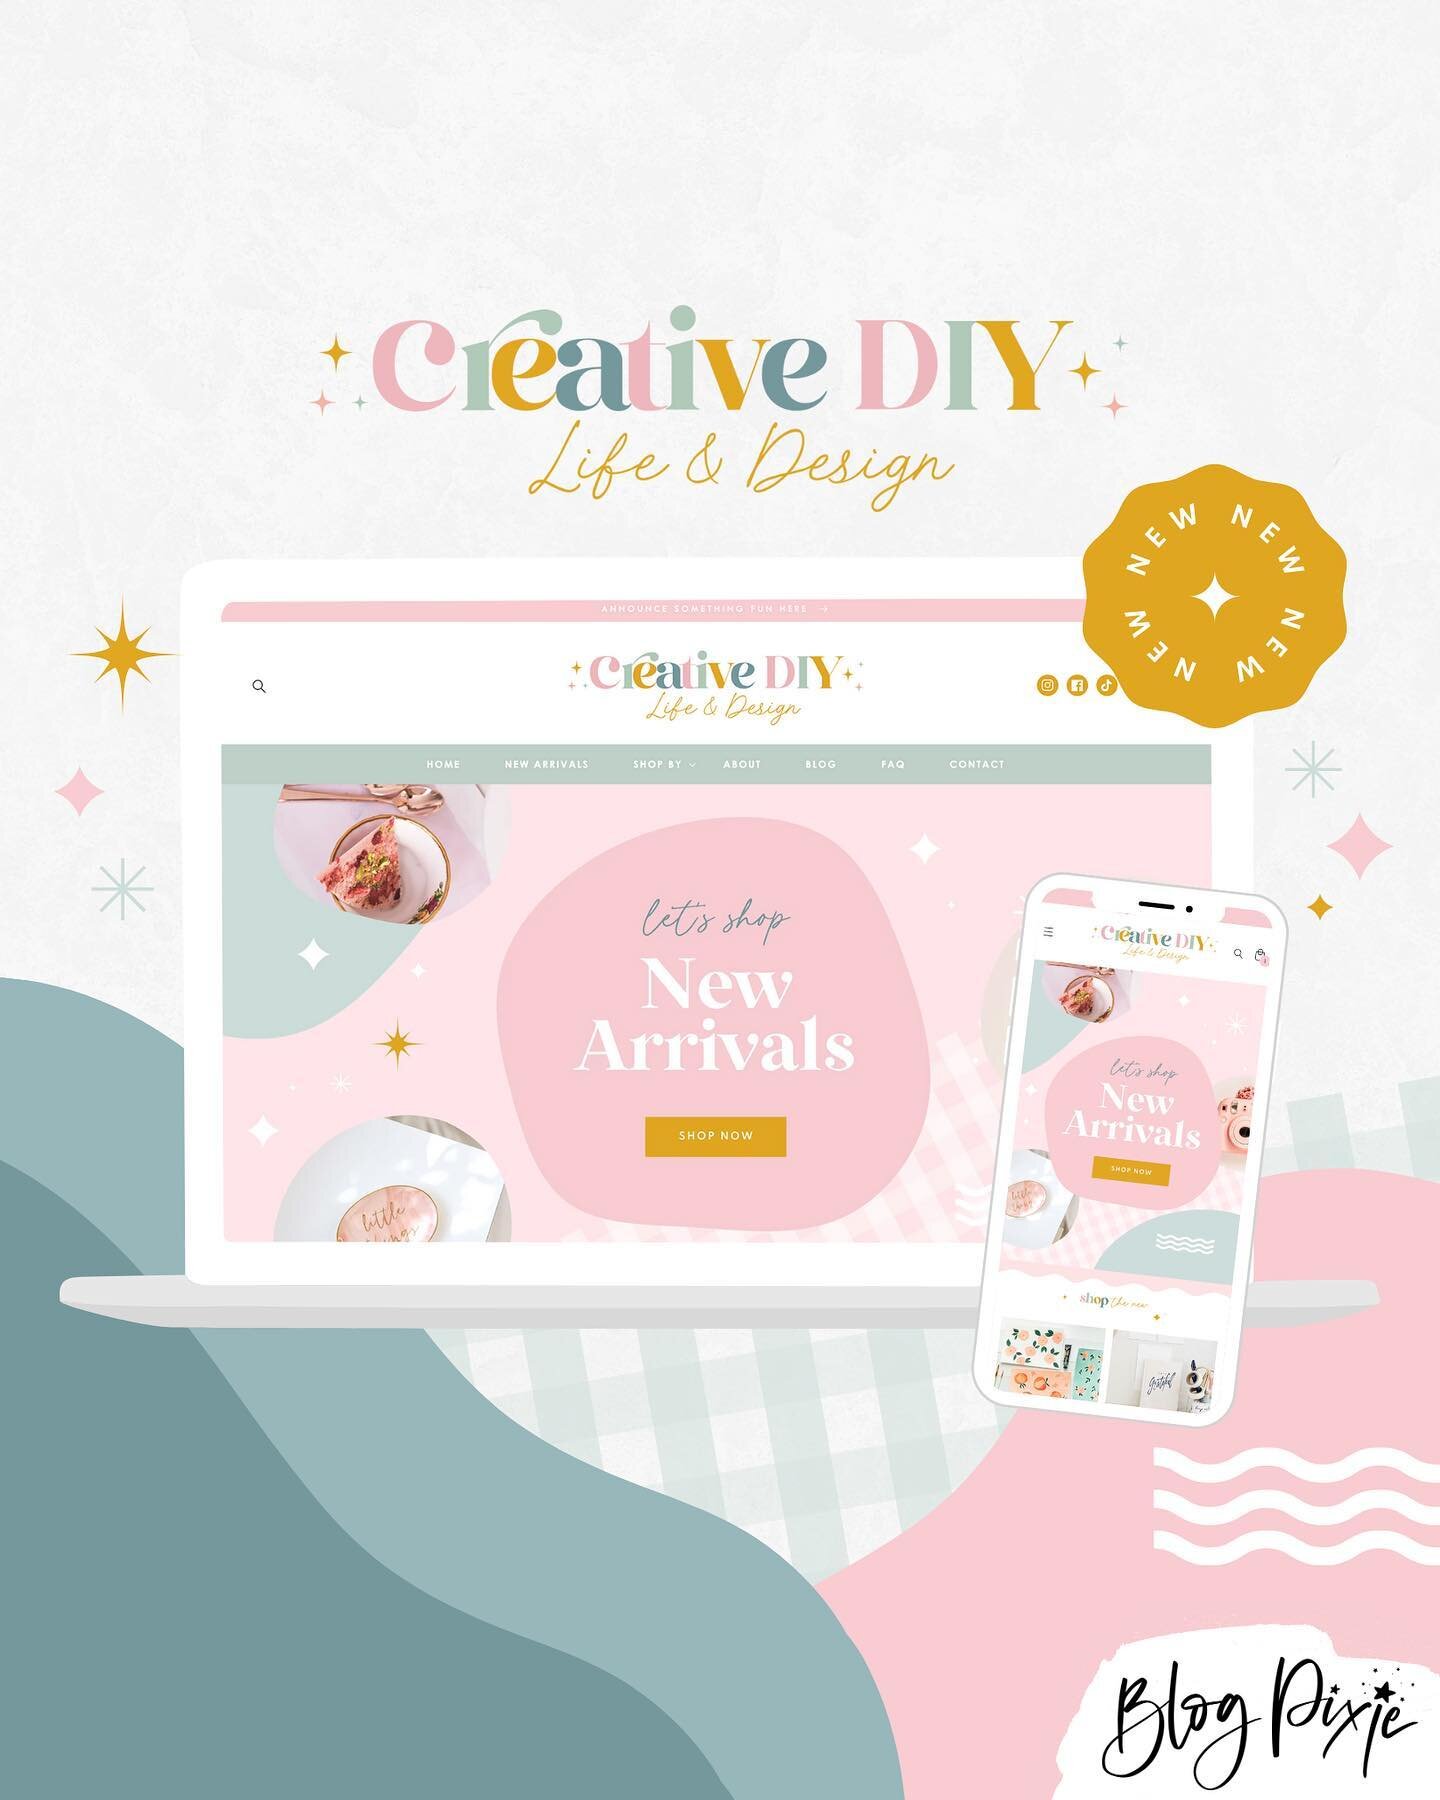 ✨NEW✨ The latest collection to hit the shop is Creative DIY, full of fun pastel shades, gingham print and stars 💖 Find the Shopify theme and Canva templates at blogpixie.com